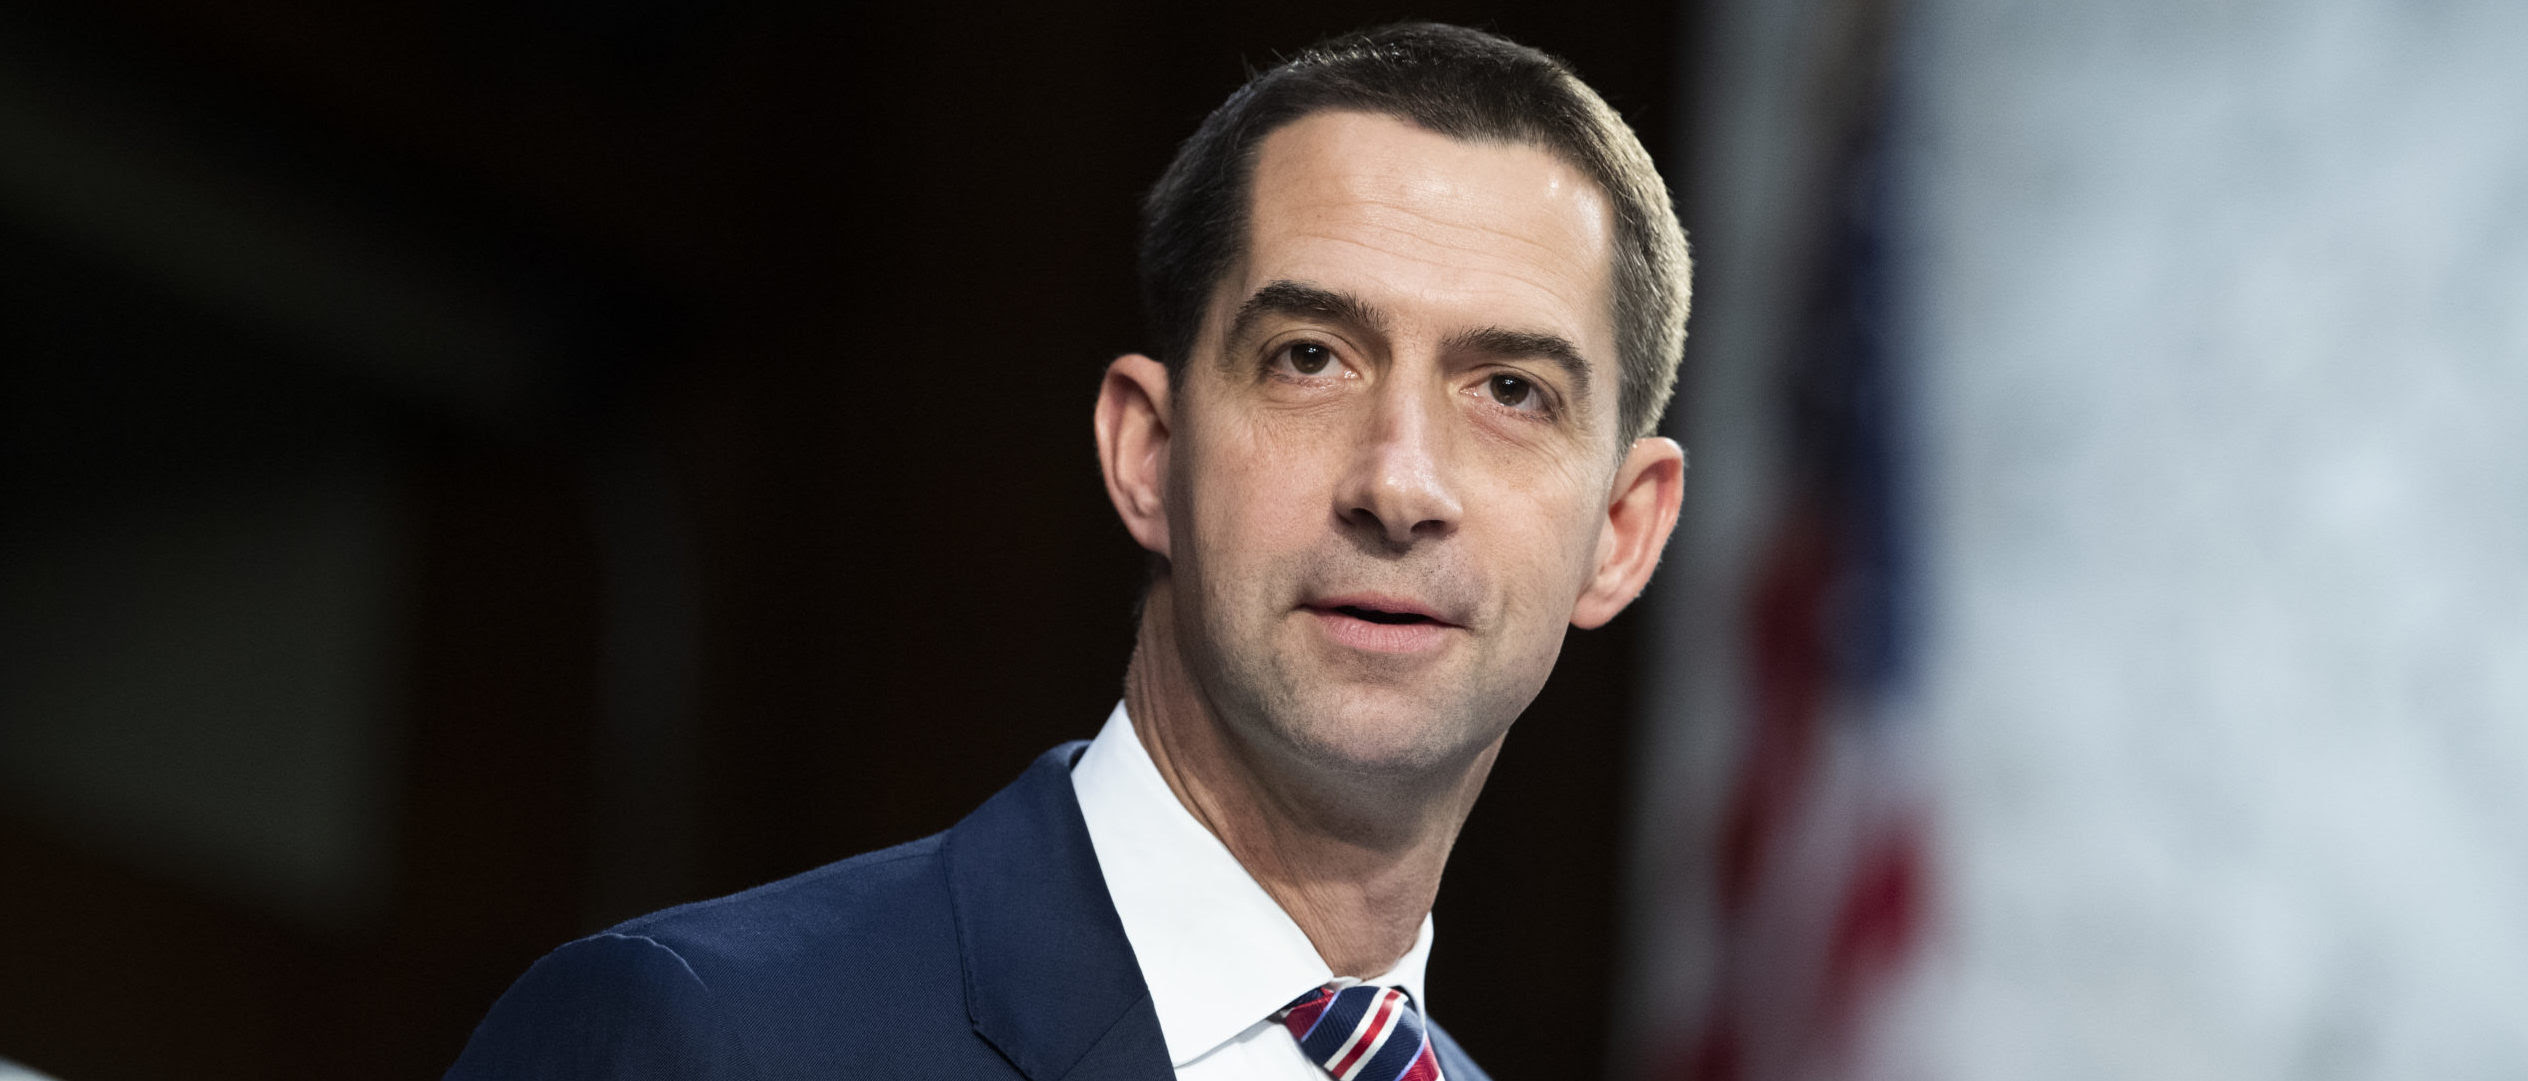 Tom Cotton Says Late-Night Comedians Are ‘C-List Actors’ Reading Democrat ‘Press Releases’